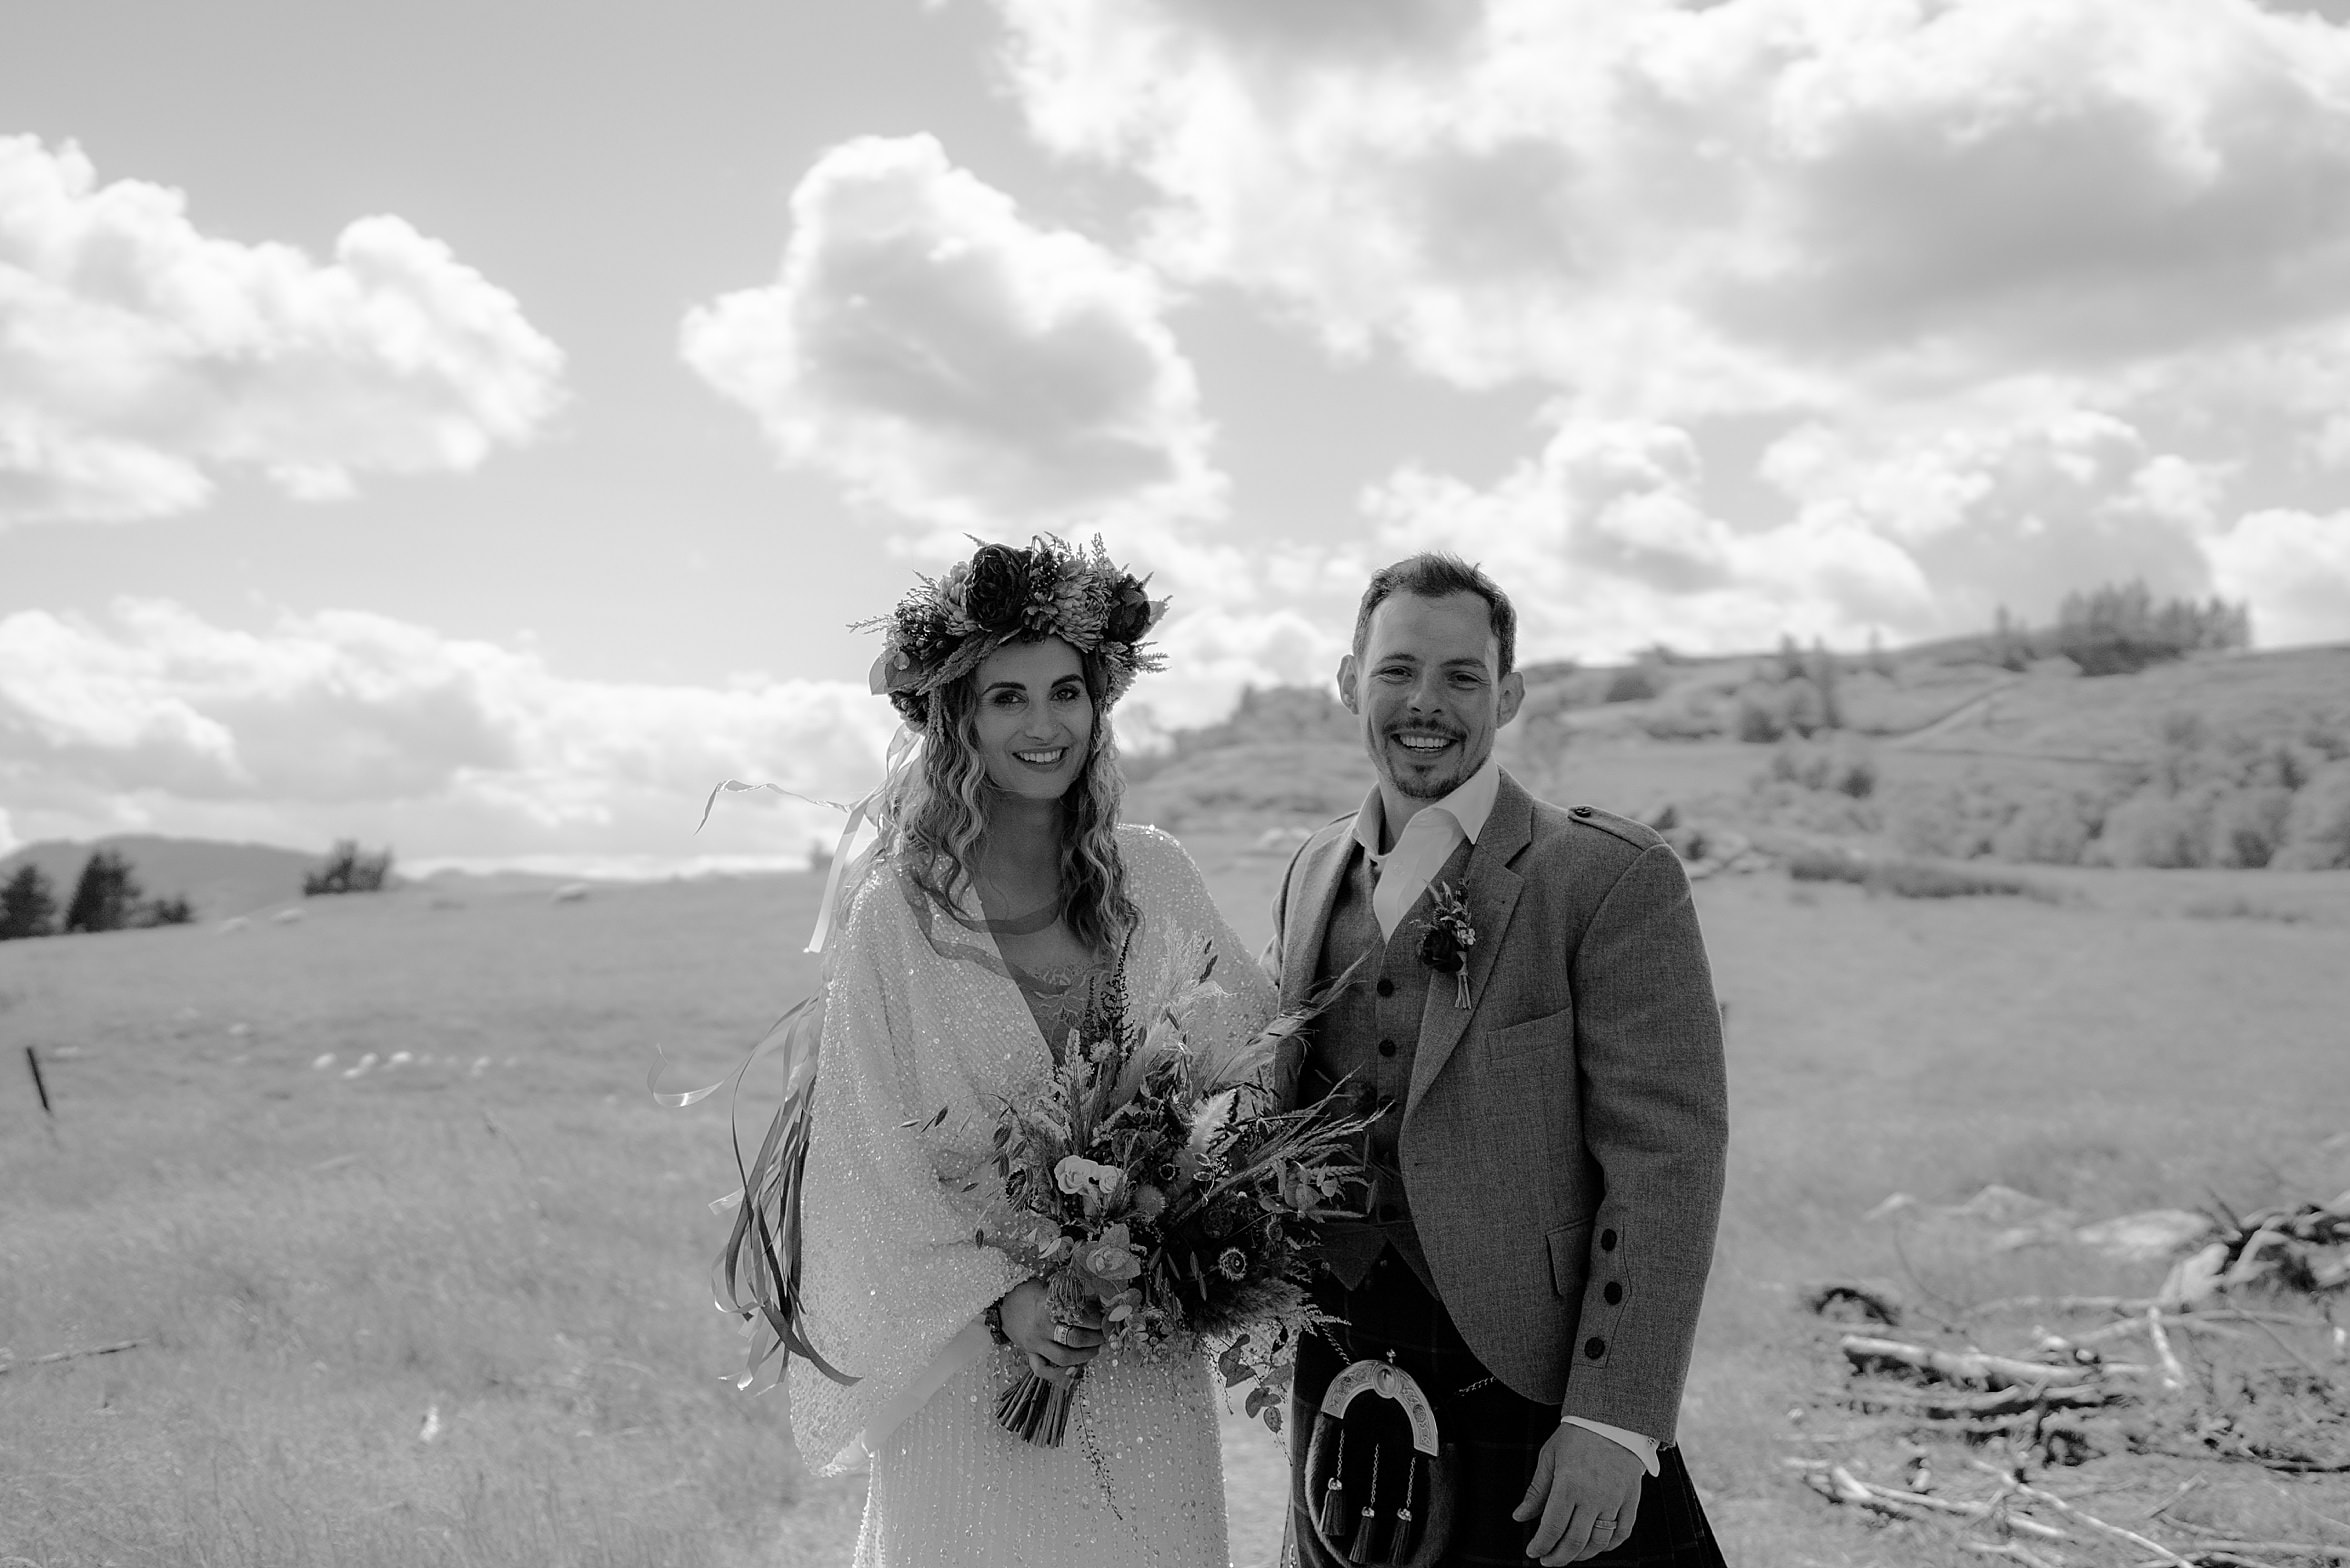 black and white photo of bride and groom standing in grass field with hills in background cardney steading wedding photography